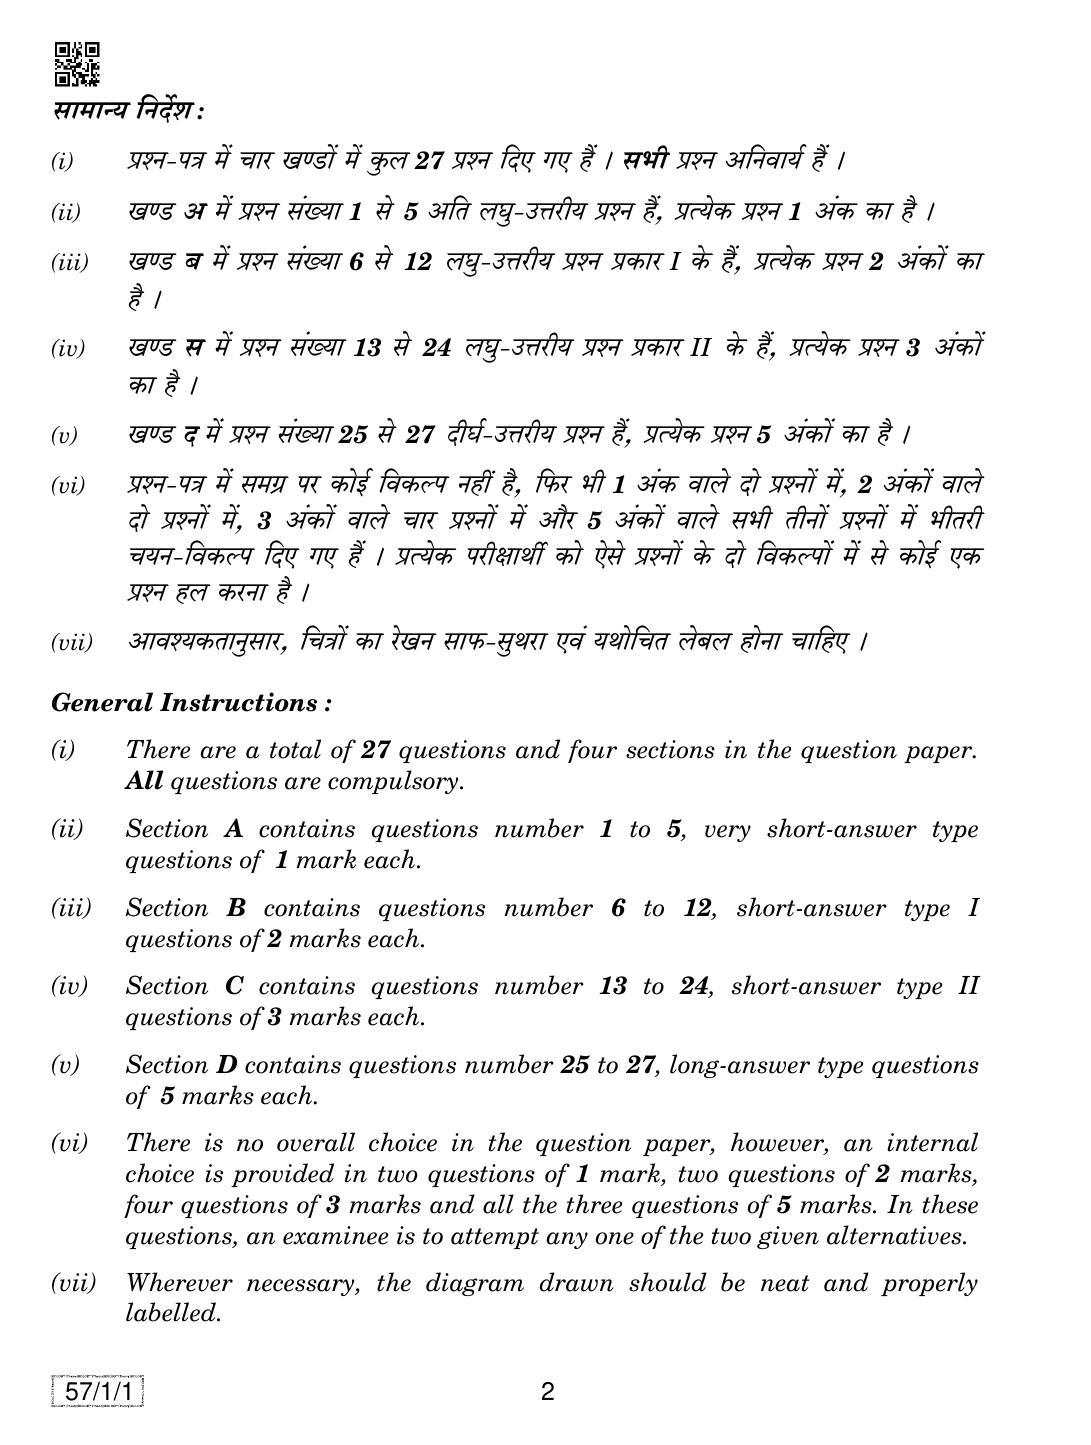 CBSE Class 12 57-1-1 BIOLOGY 2019 Compartment Question Paper - Page 2